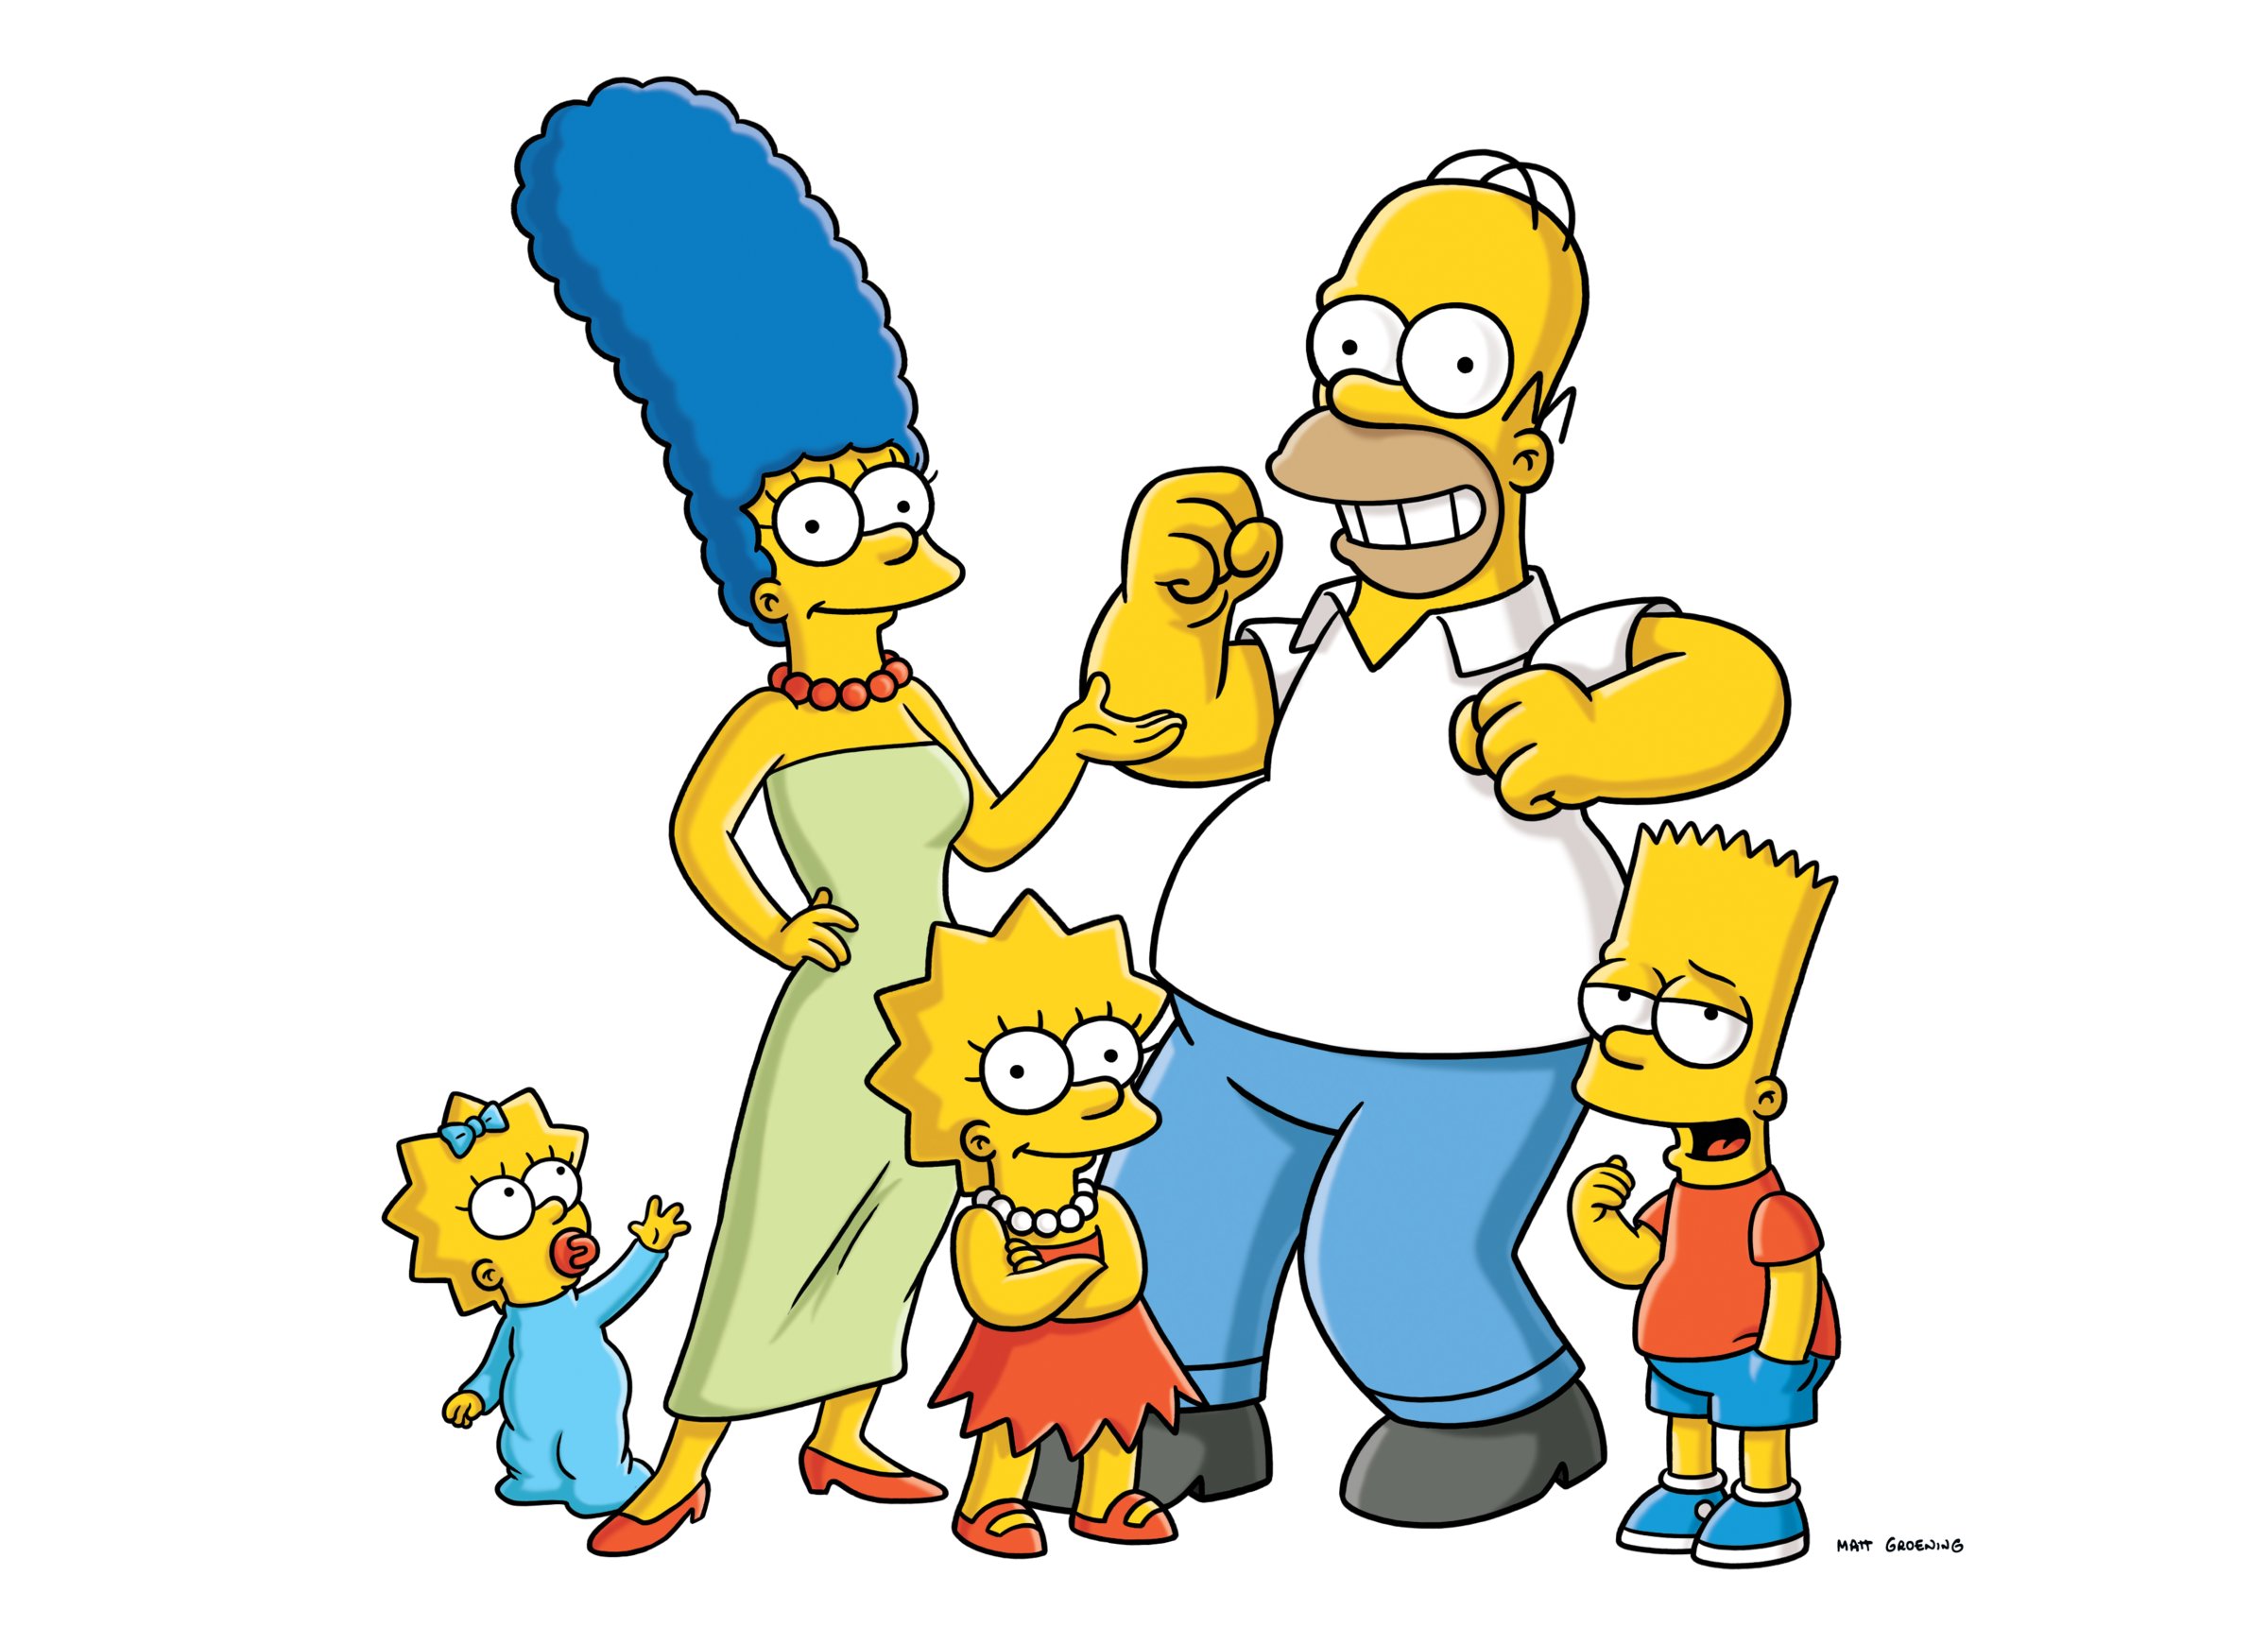 THE SIMPSONS: Join (L-R) Maggie, Marge, Lisa, Homer and Bart Simpson for the 21st season premiere episode "Homer The Whopper," of THE SIMPSONS airing Sunday, Sept. 27 (8:00 - 8:30 PM ET/PT) on FOX. THE SIMPSONS ™ and © 2009 TCFFC ALL RIGHTS RESERVED.